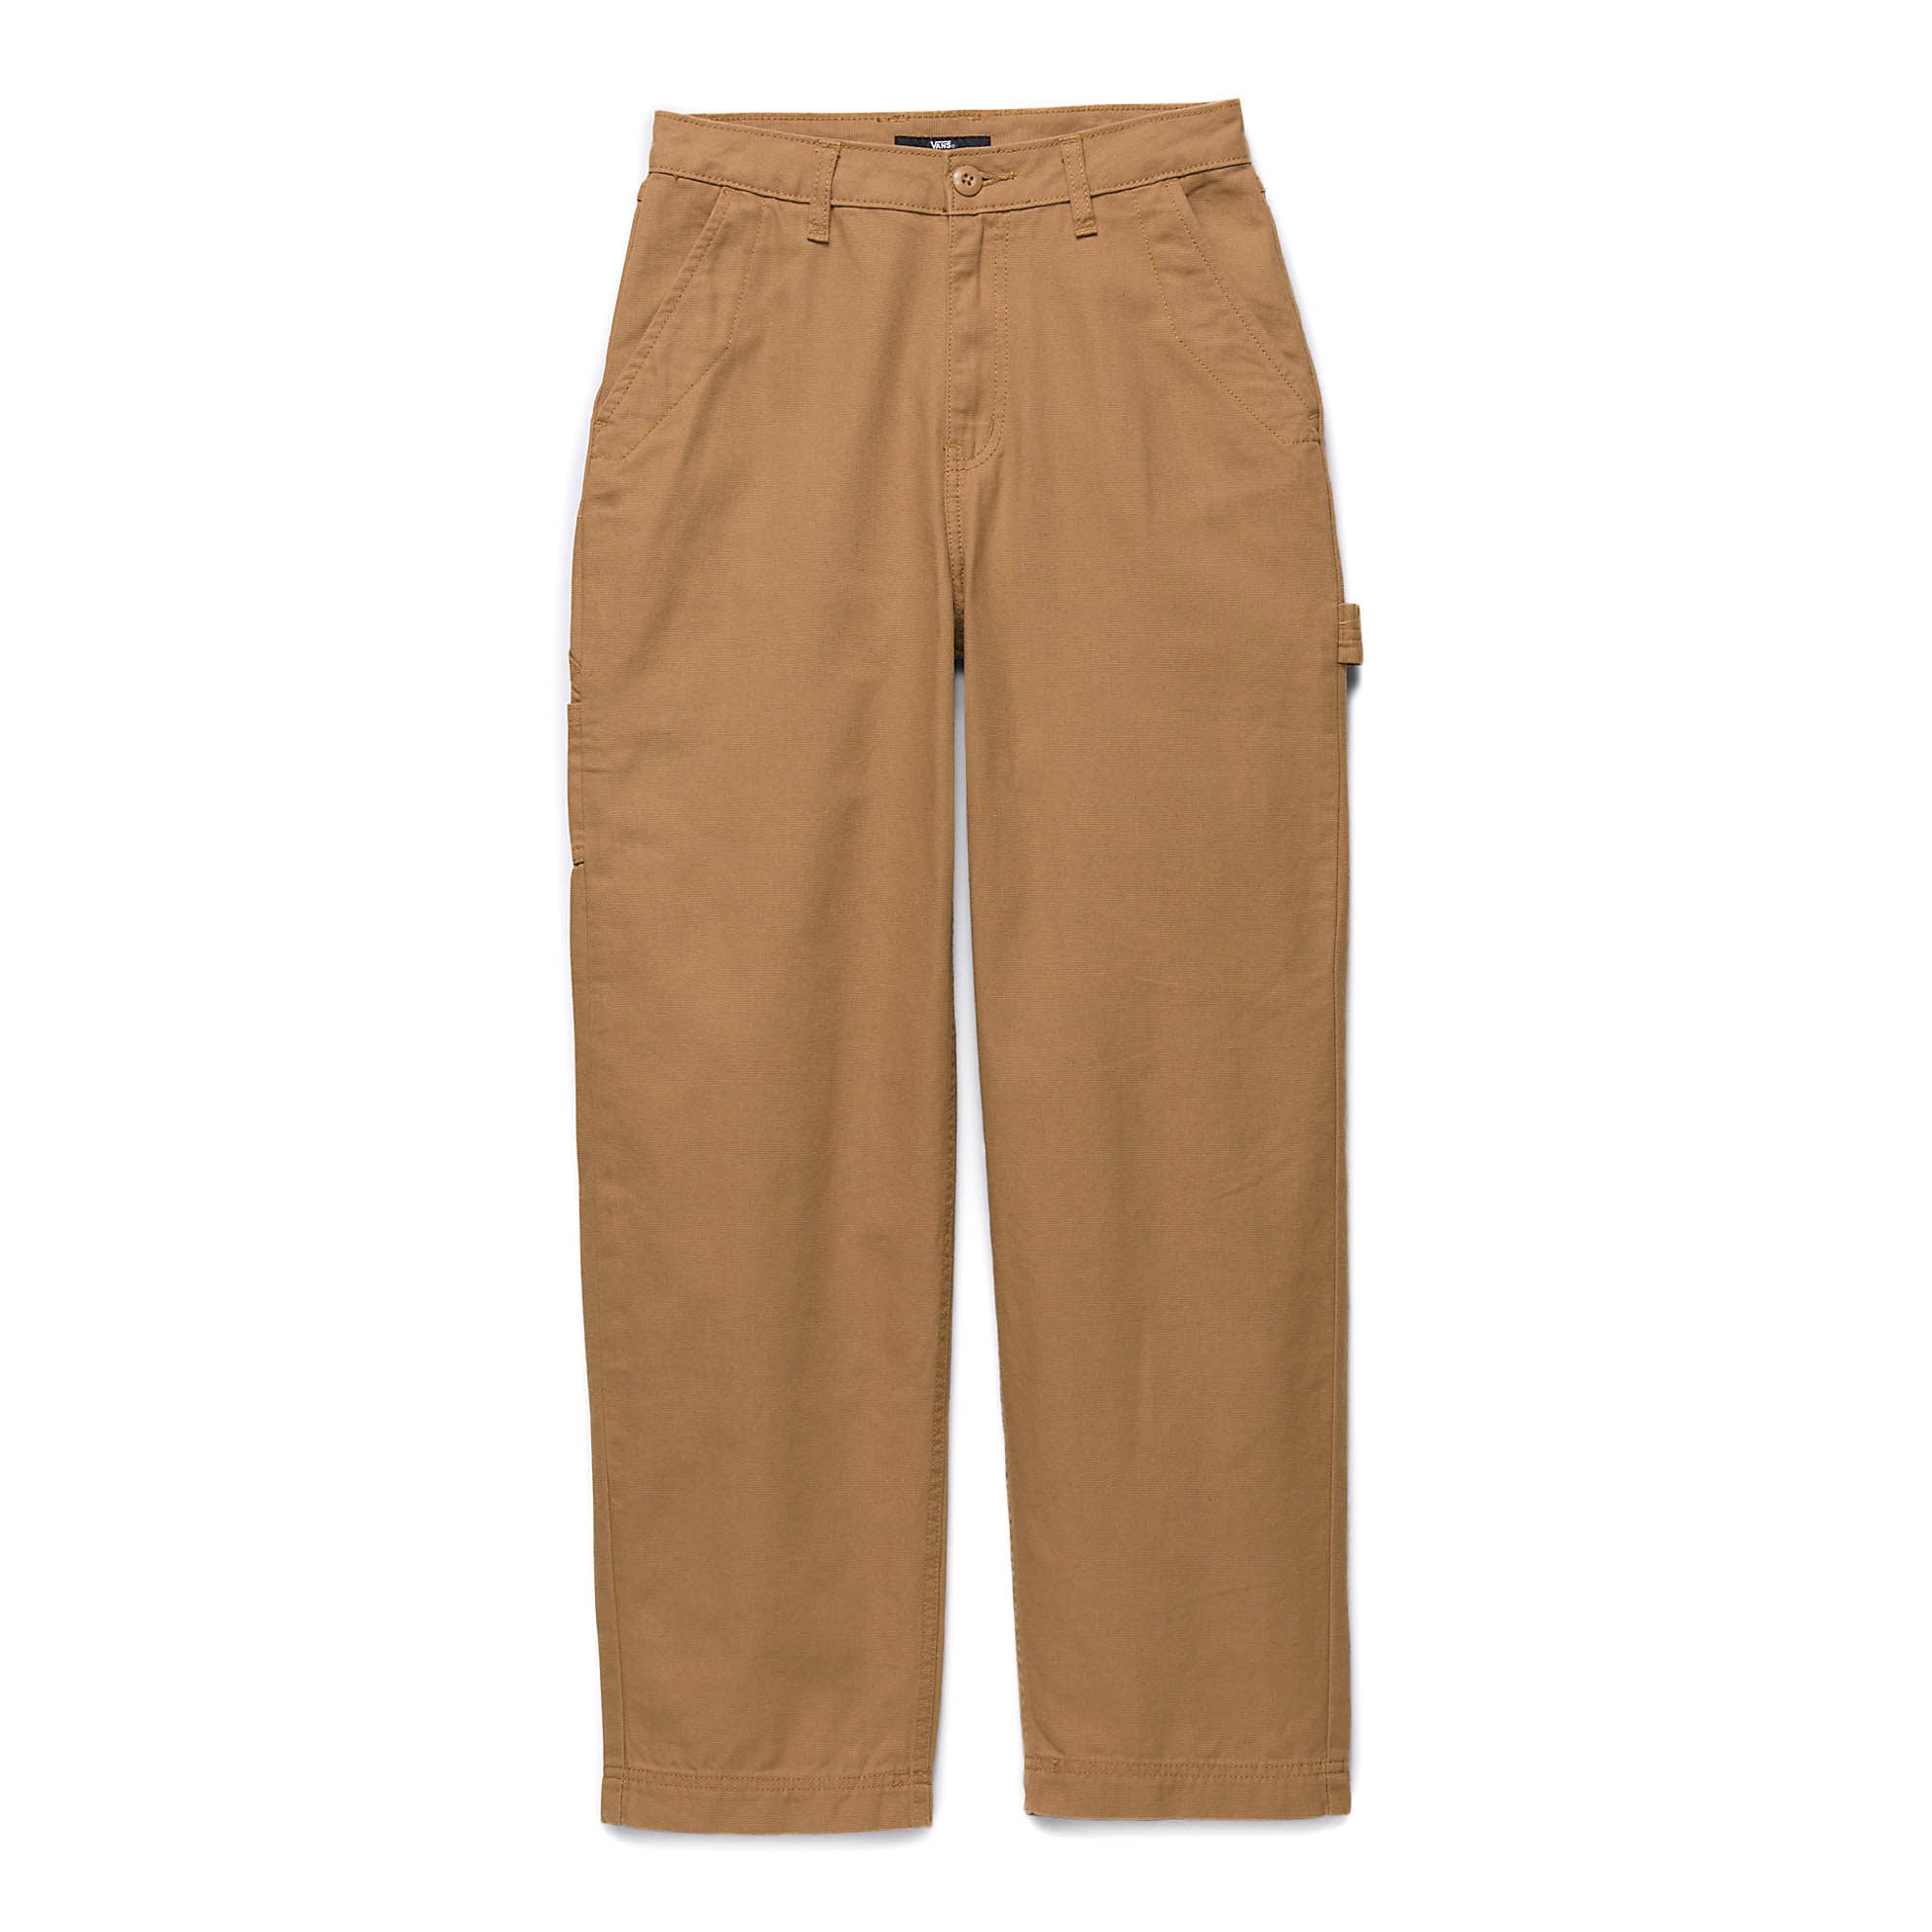 Buy Men's Outdoor Large Size Work Trousers,Mens Cotton Linen Casual Pants  Elastic Waist Loose Fit Trousers Cargo Beach Pant Khaki at Amazon.in